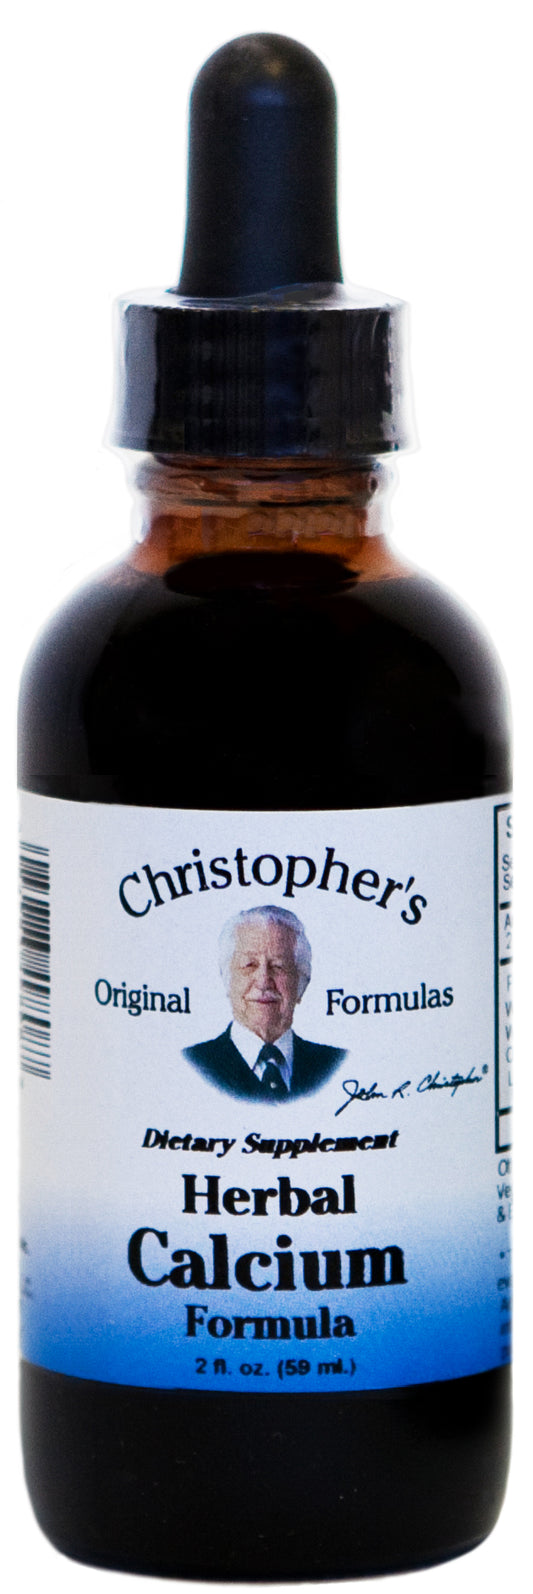 Dr. Christopher's Herbal Calcium Formula Extract